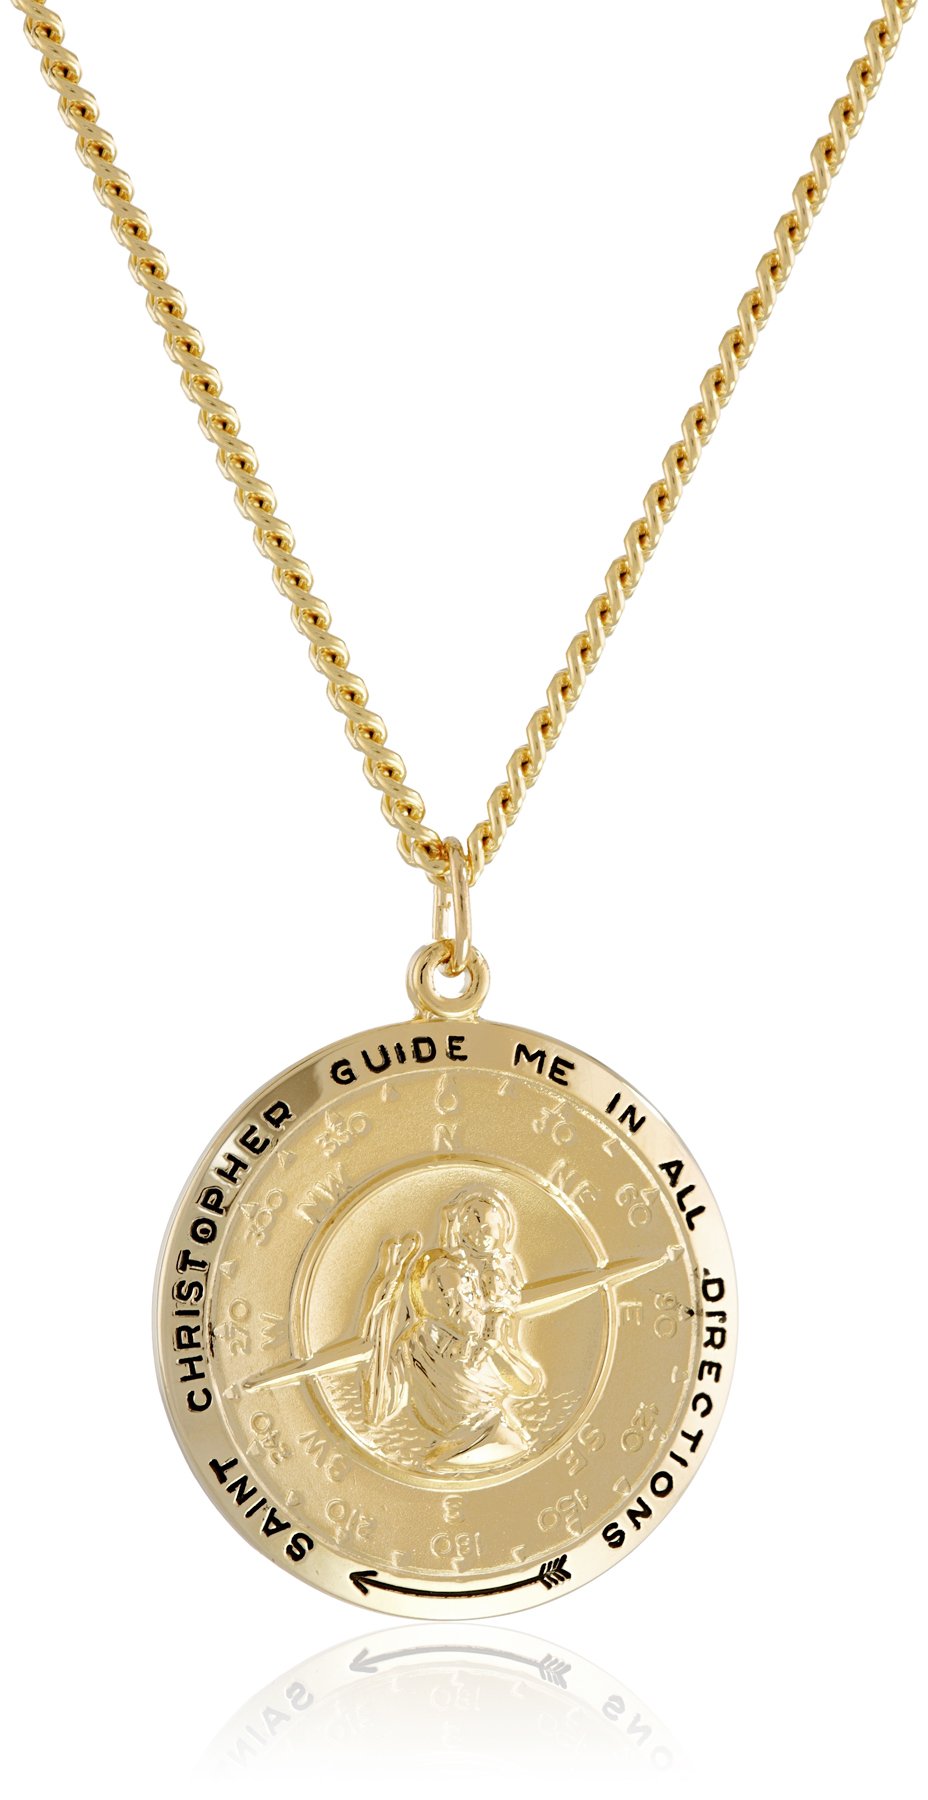 Amazon Collection Men's 14k Gold-Filled Round Saint Christopher Compass Medal with Stainless Steel Chain